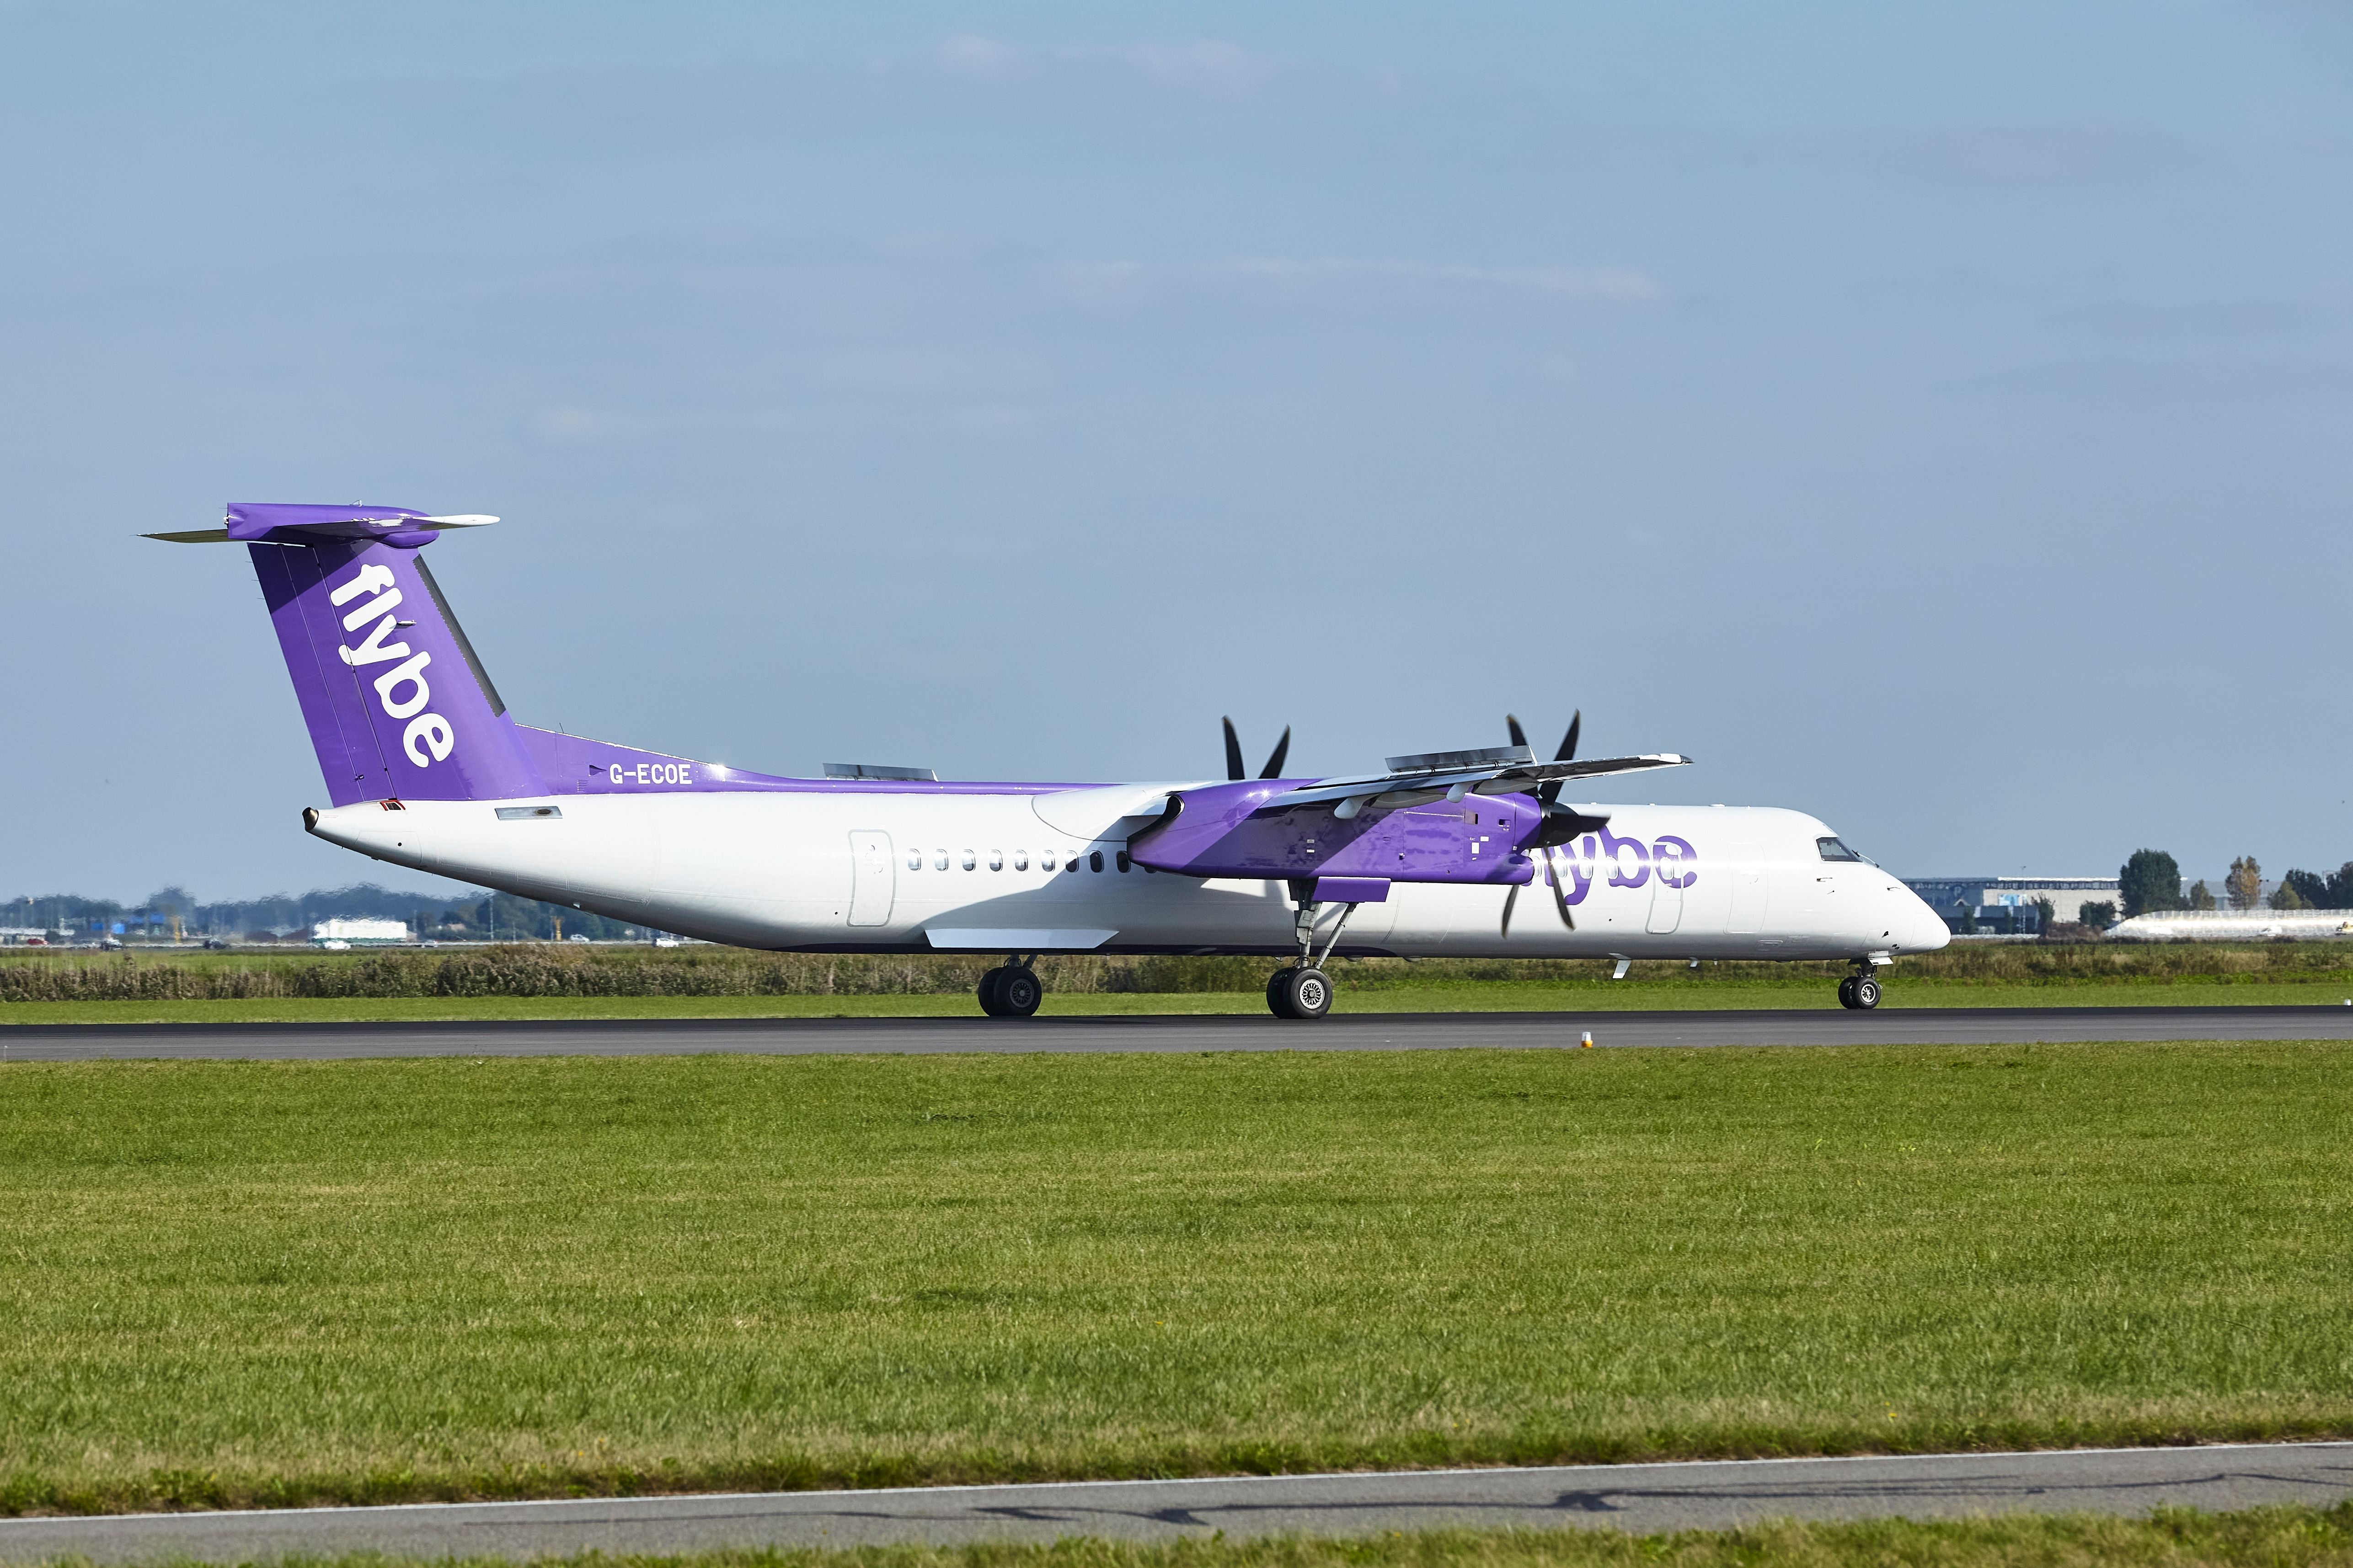 Flybe Dash 8 in the Netherlands